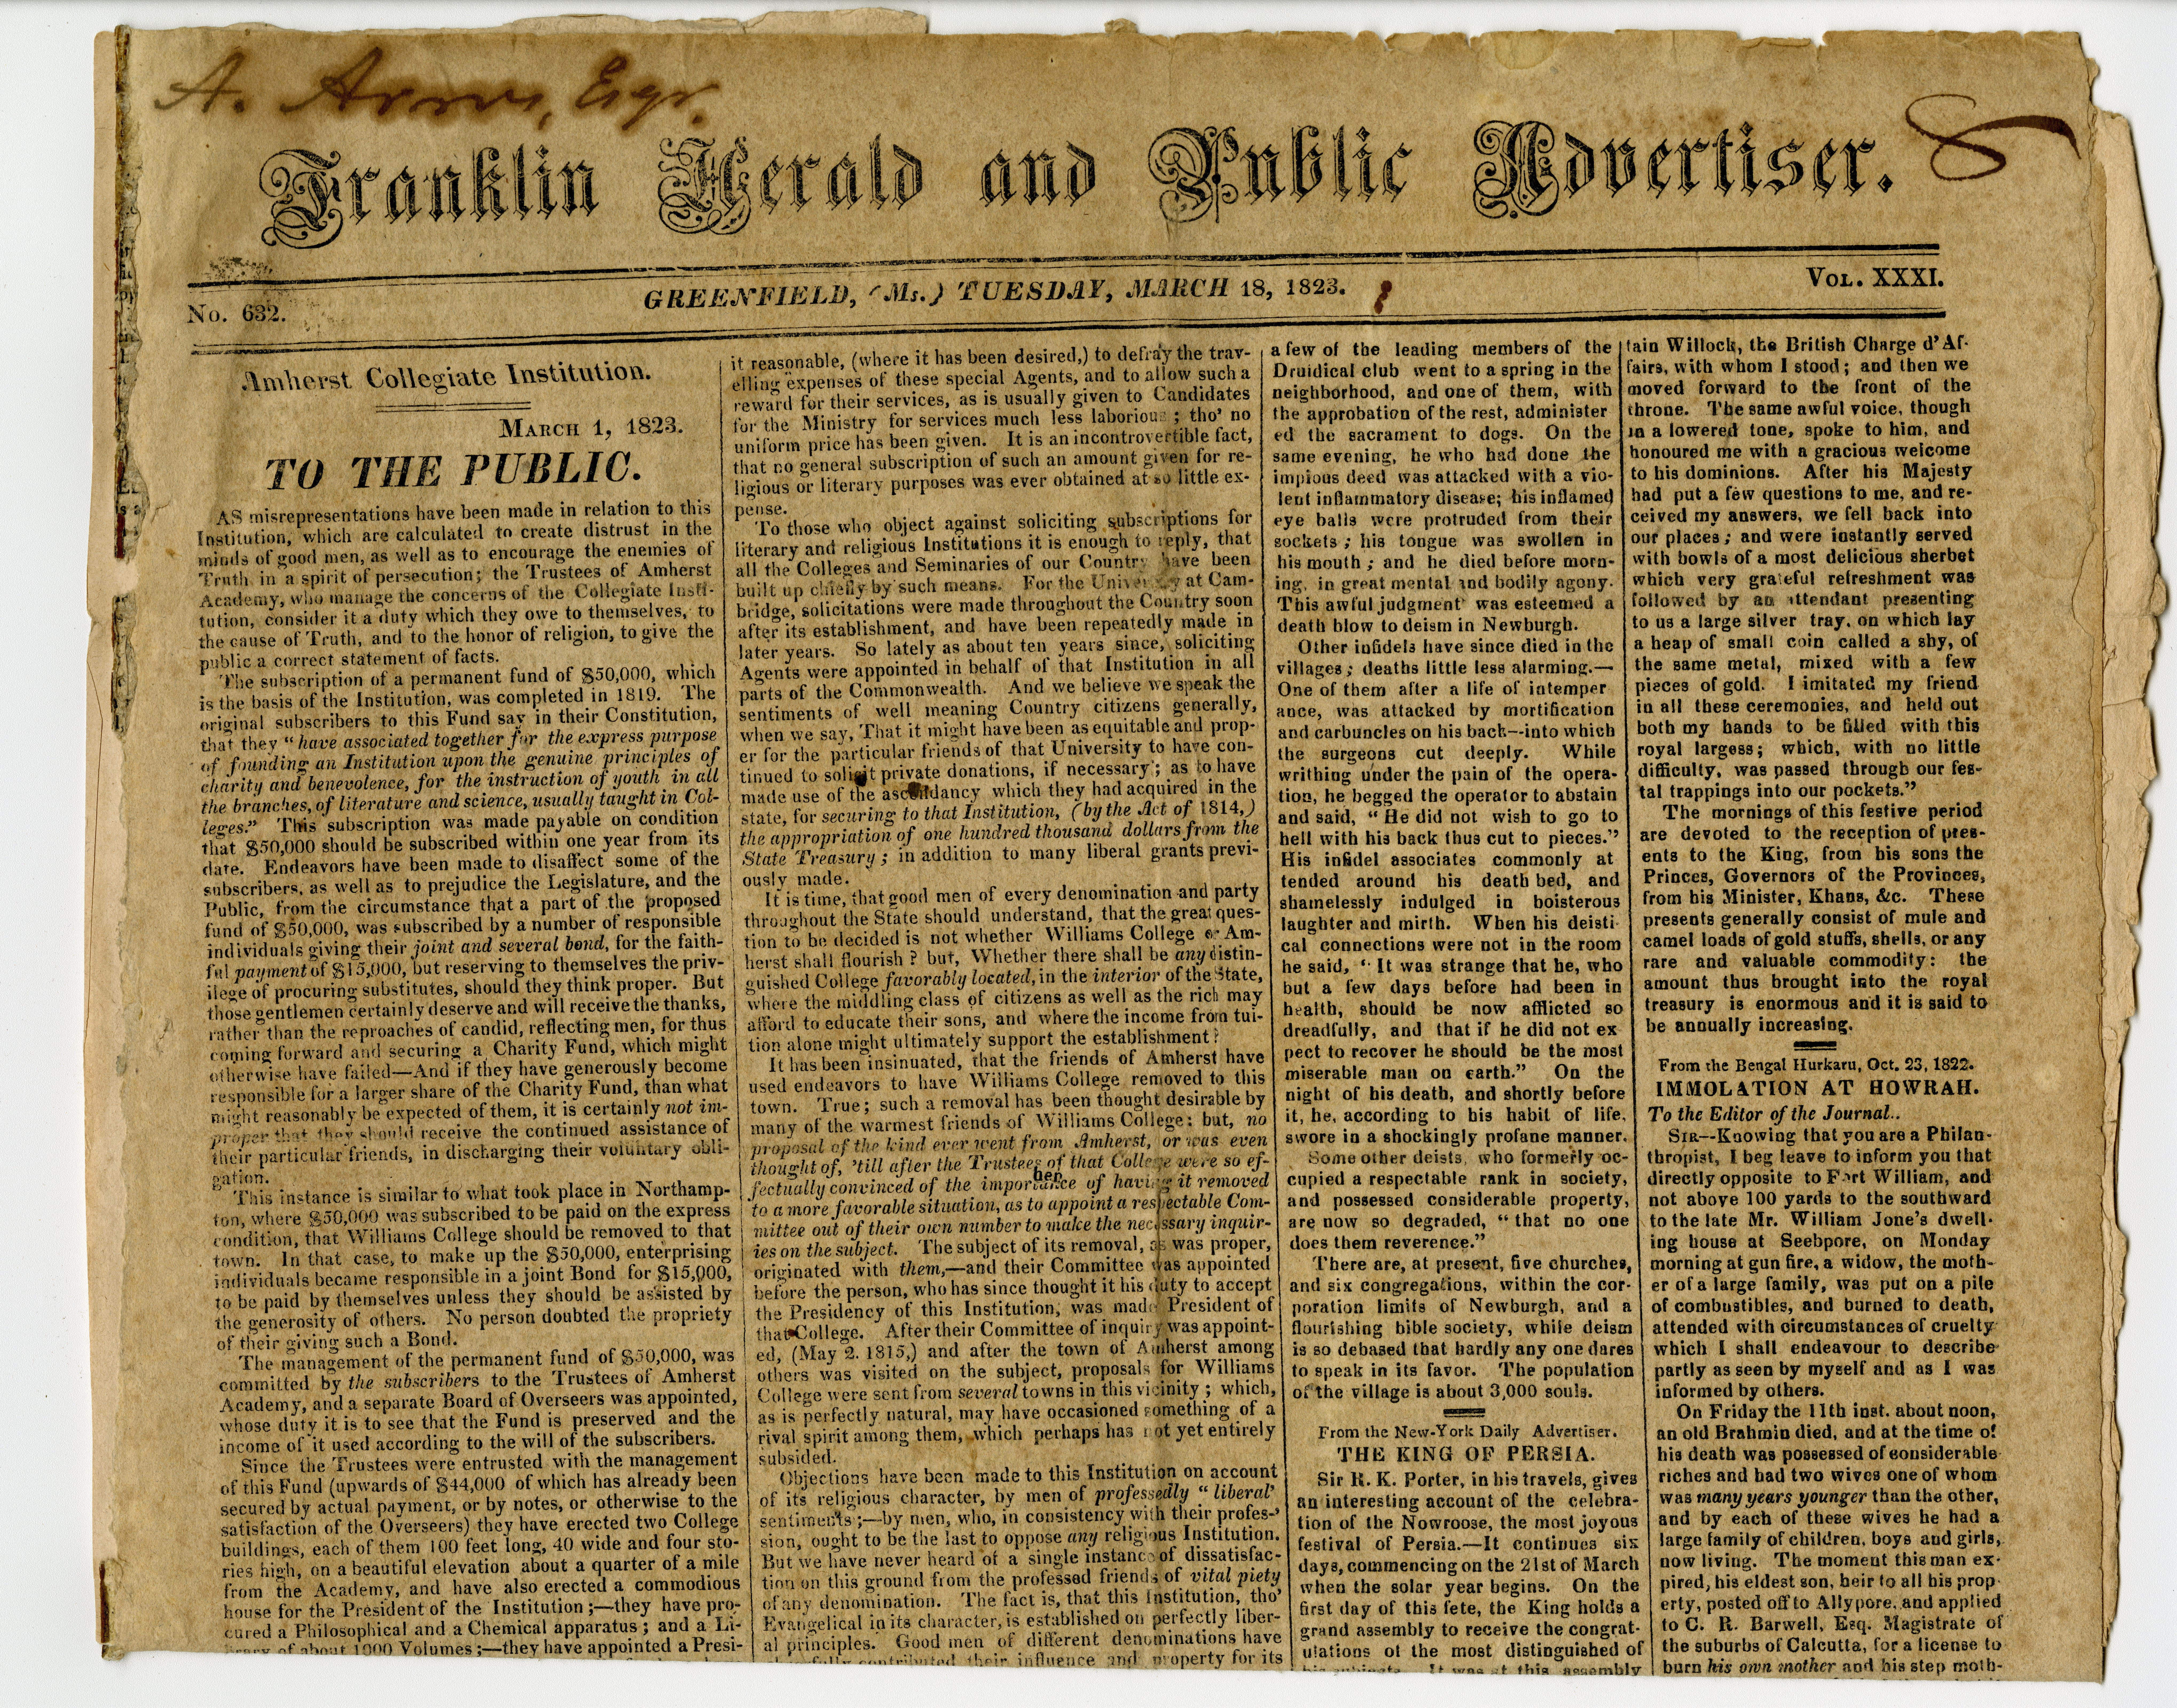 Franklin Herald and Public Advertiser, 1823 Mar 18 in Amherst College Early History Collection (Box OS-1, folder 2)